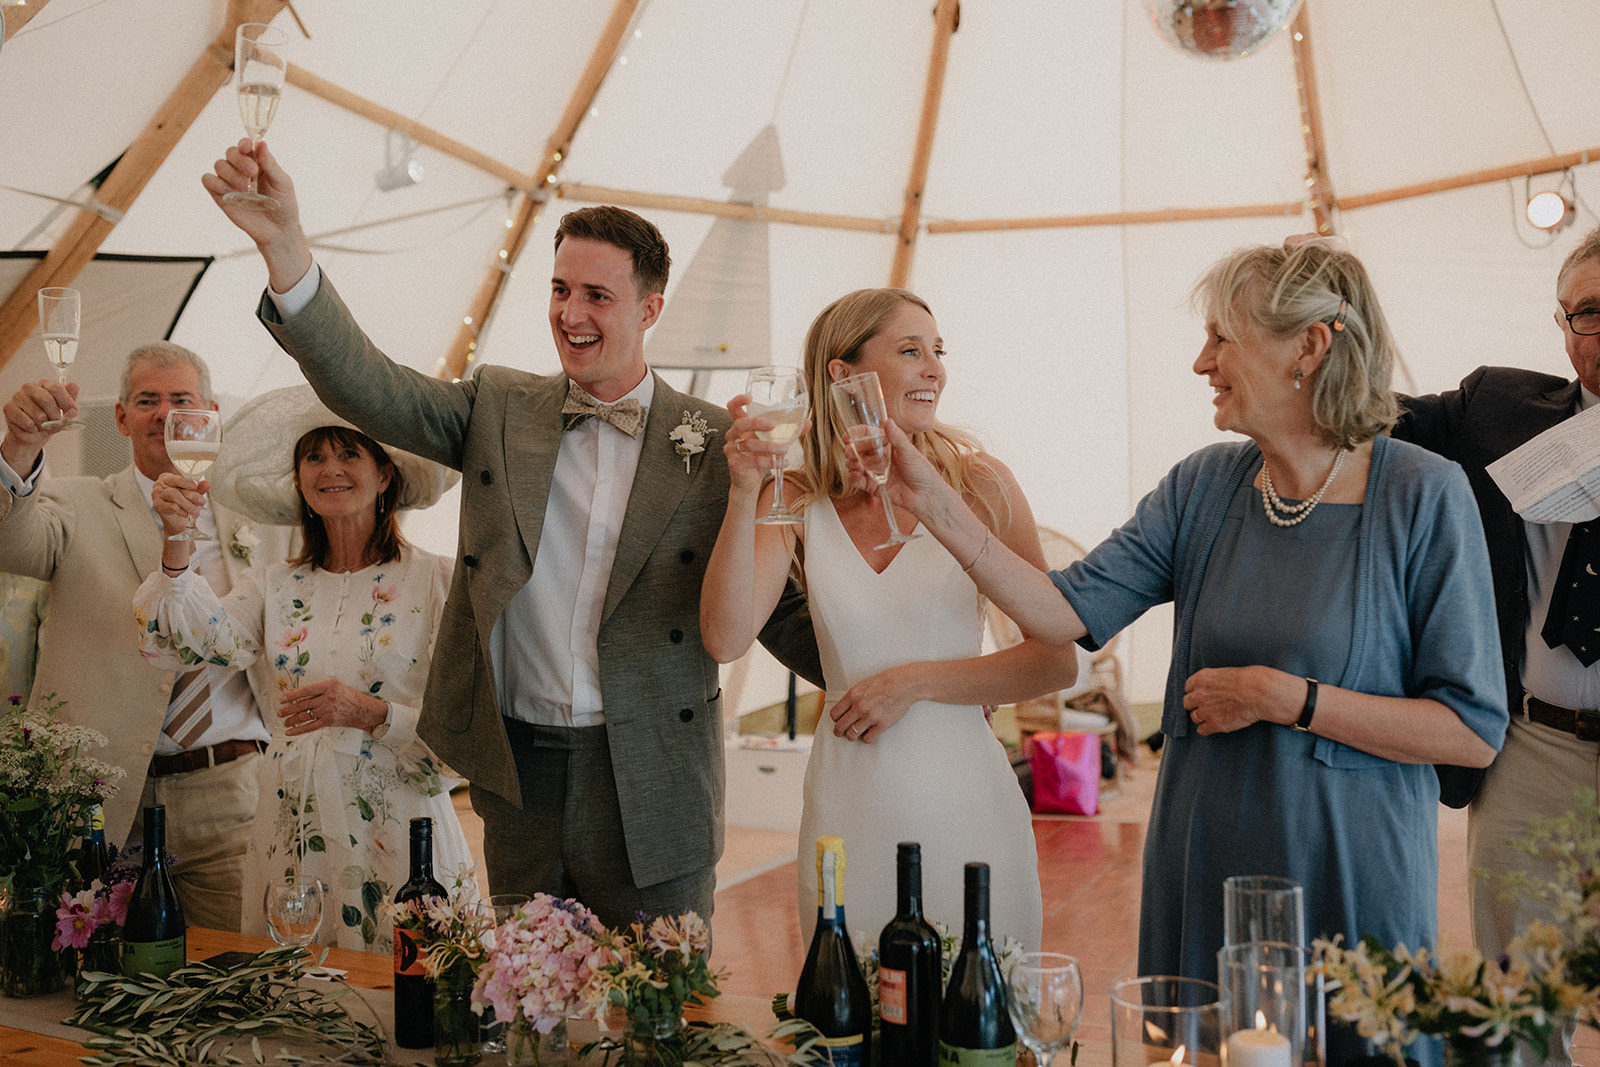 festival style wedding in sussex